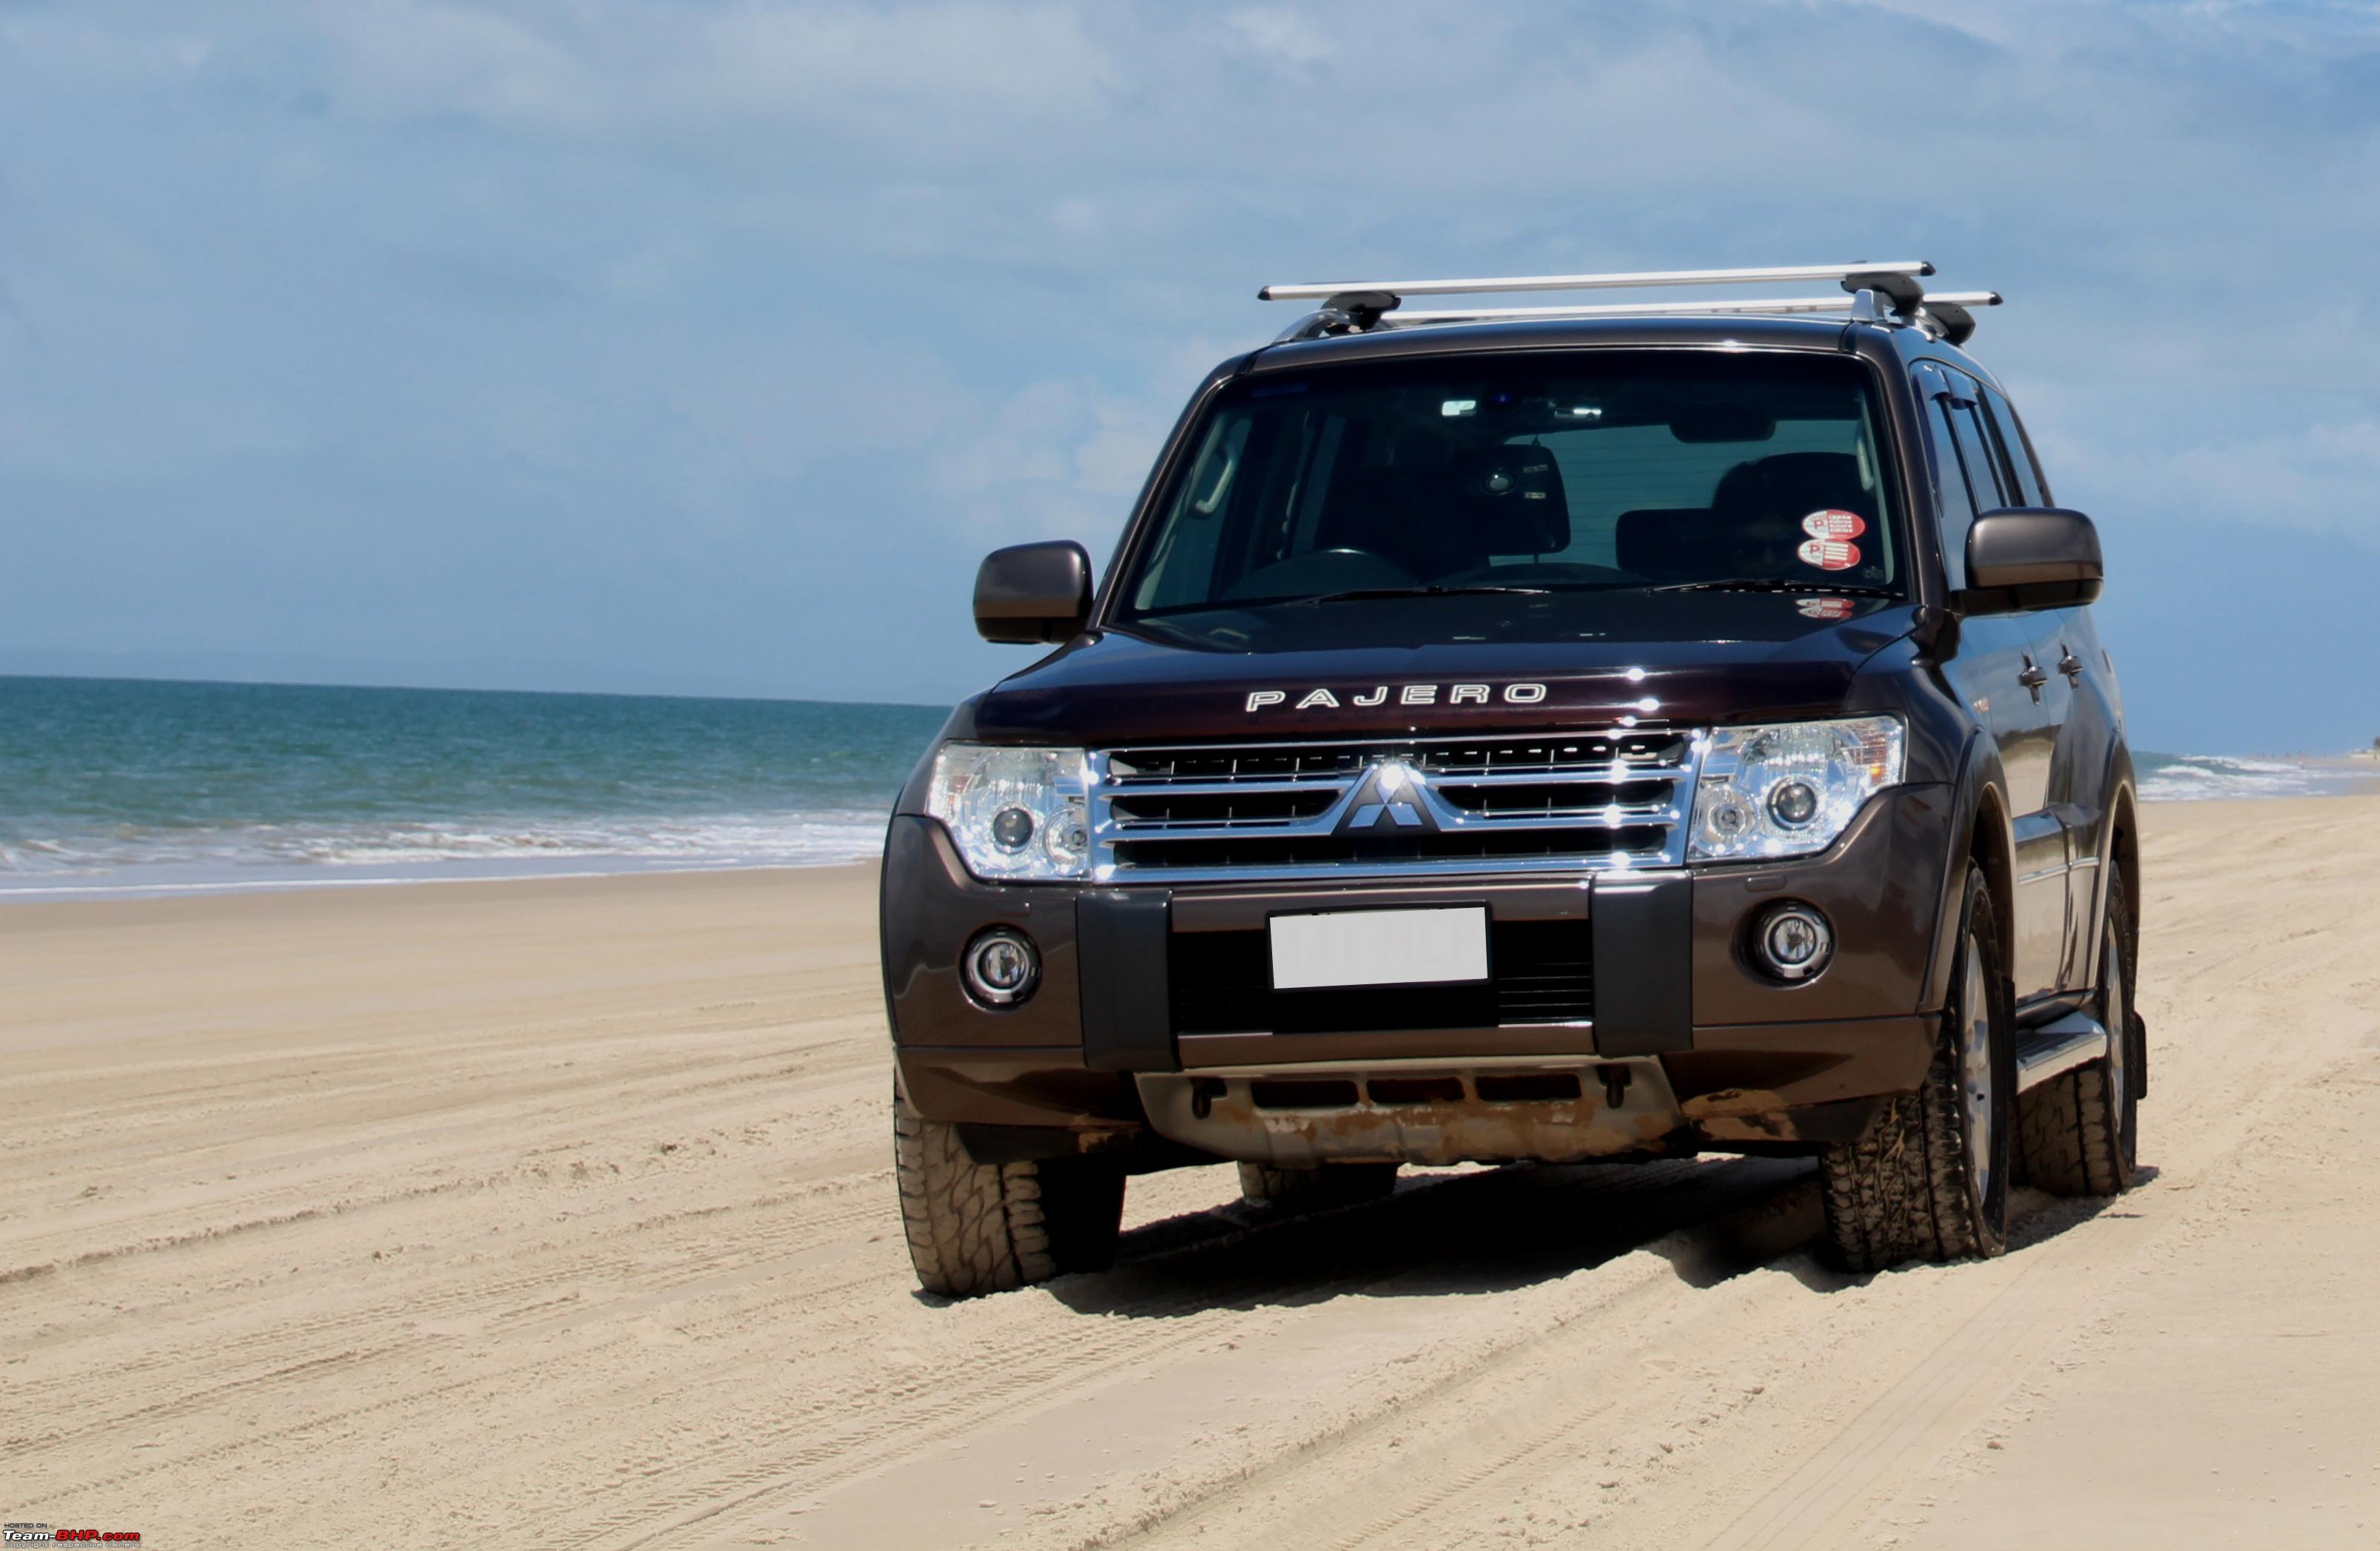 legendary mitsubishi pajero to go out of production in